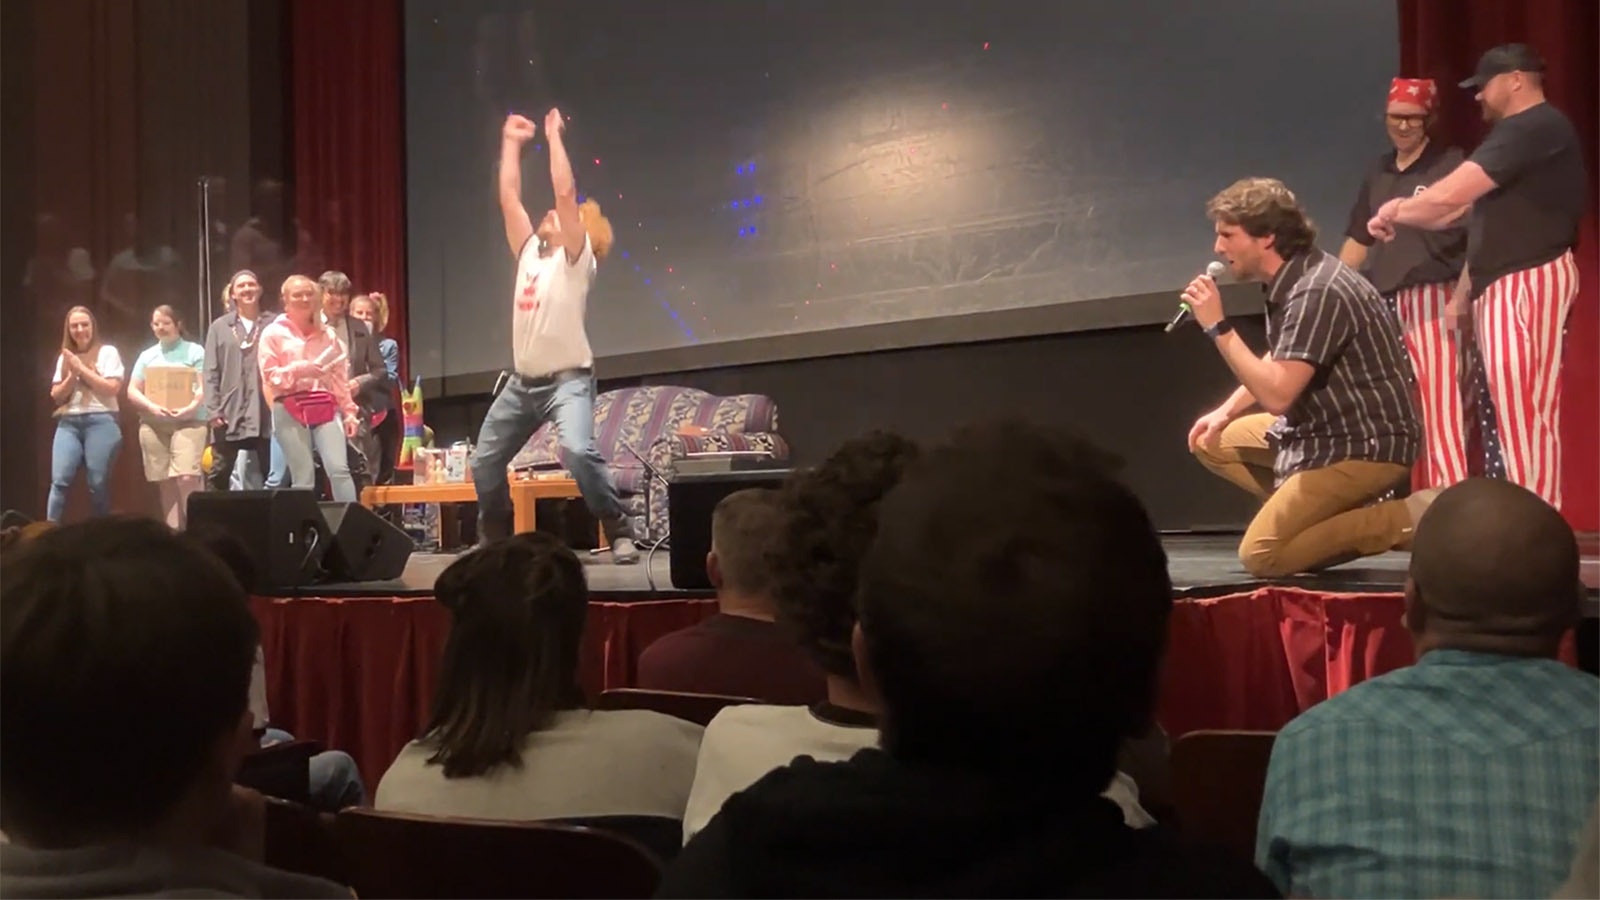 A screenshot of an attendee at Friday's "Napoleon Dynamite" event in Missoula, Montana, doing the iconic Napoleon dance, with actor Jon Heder commenting at right.